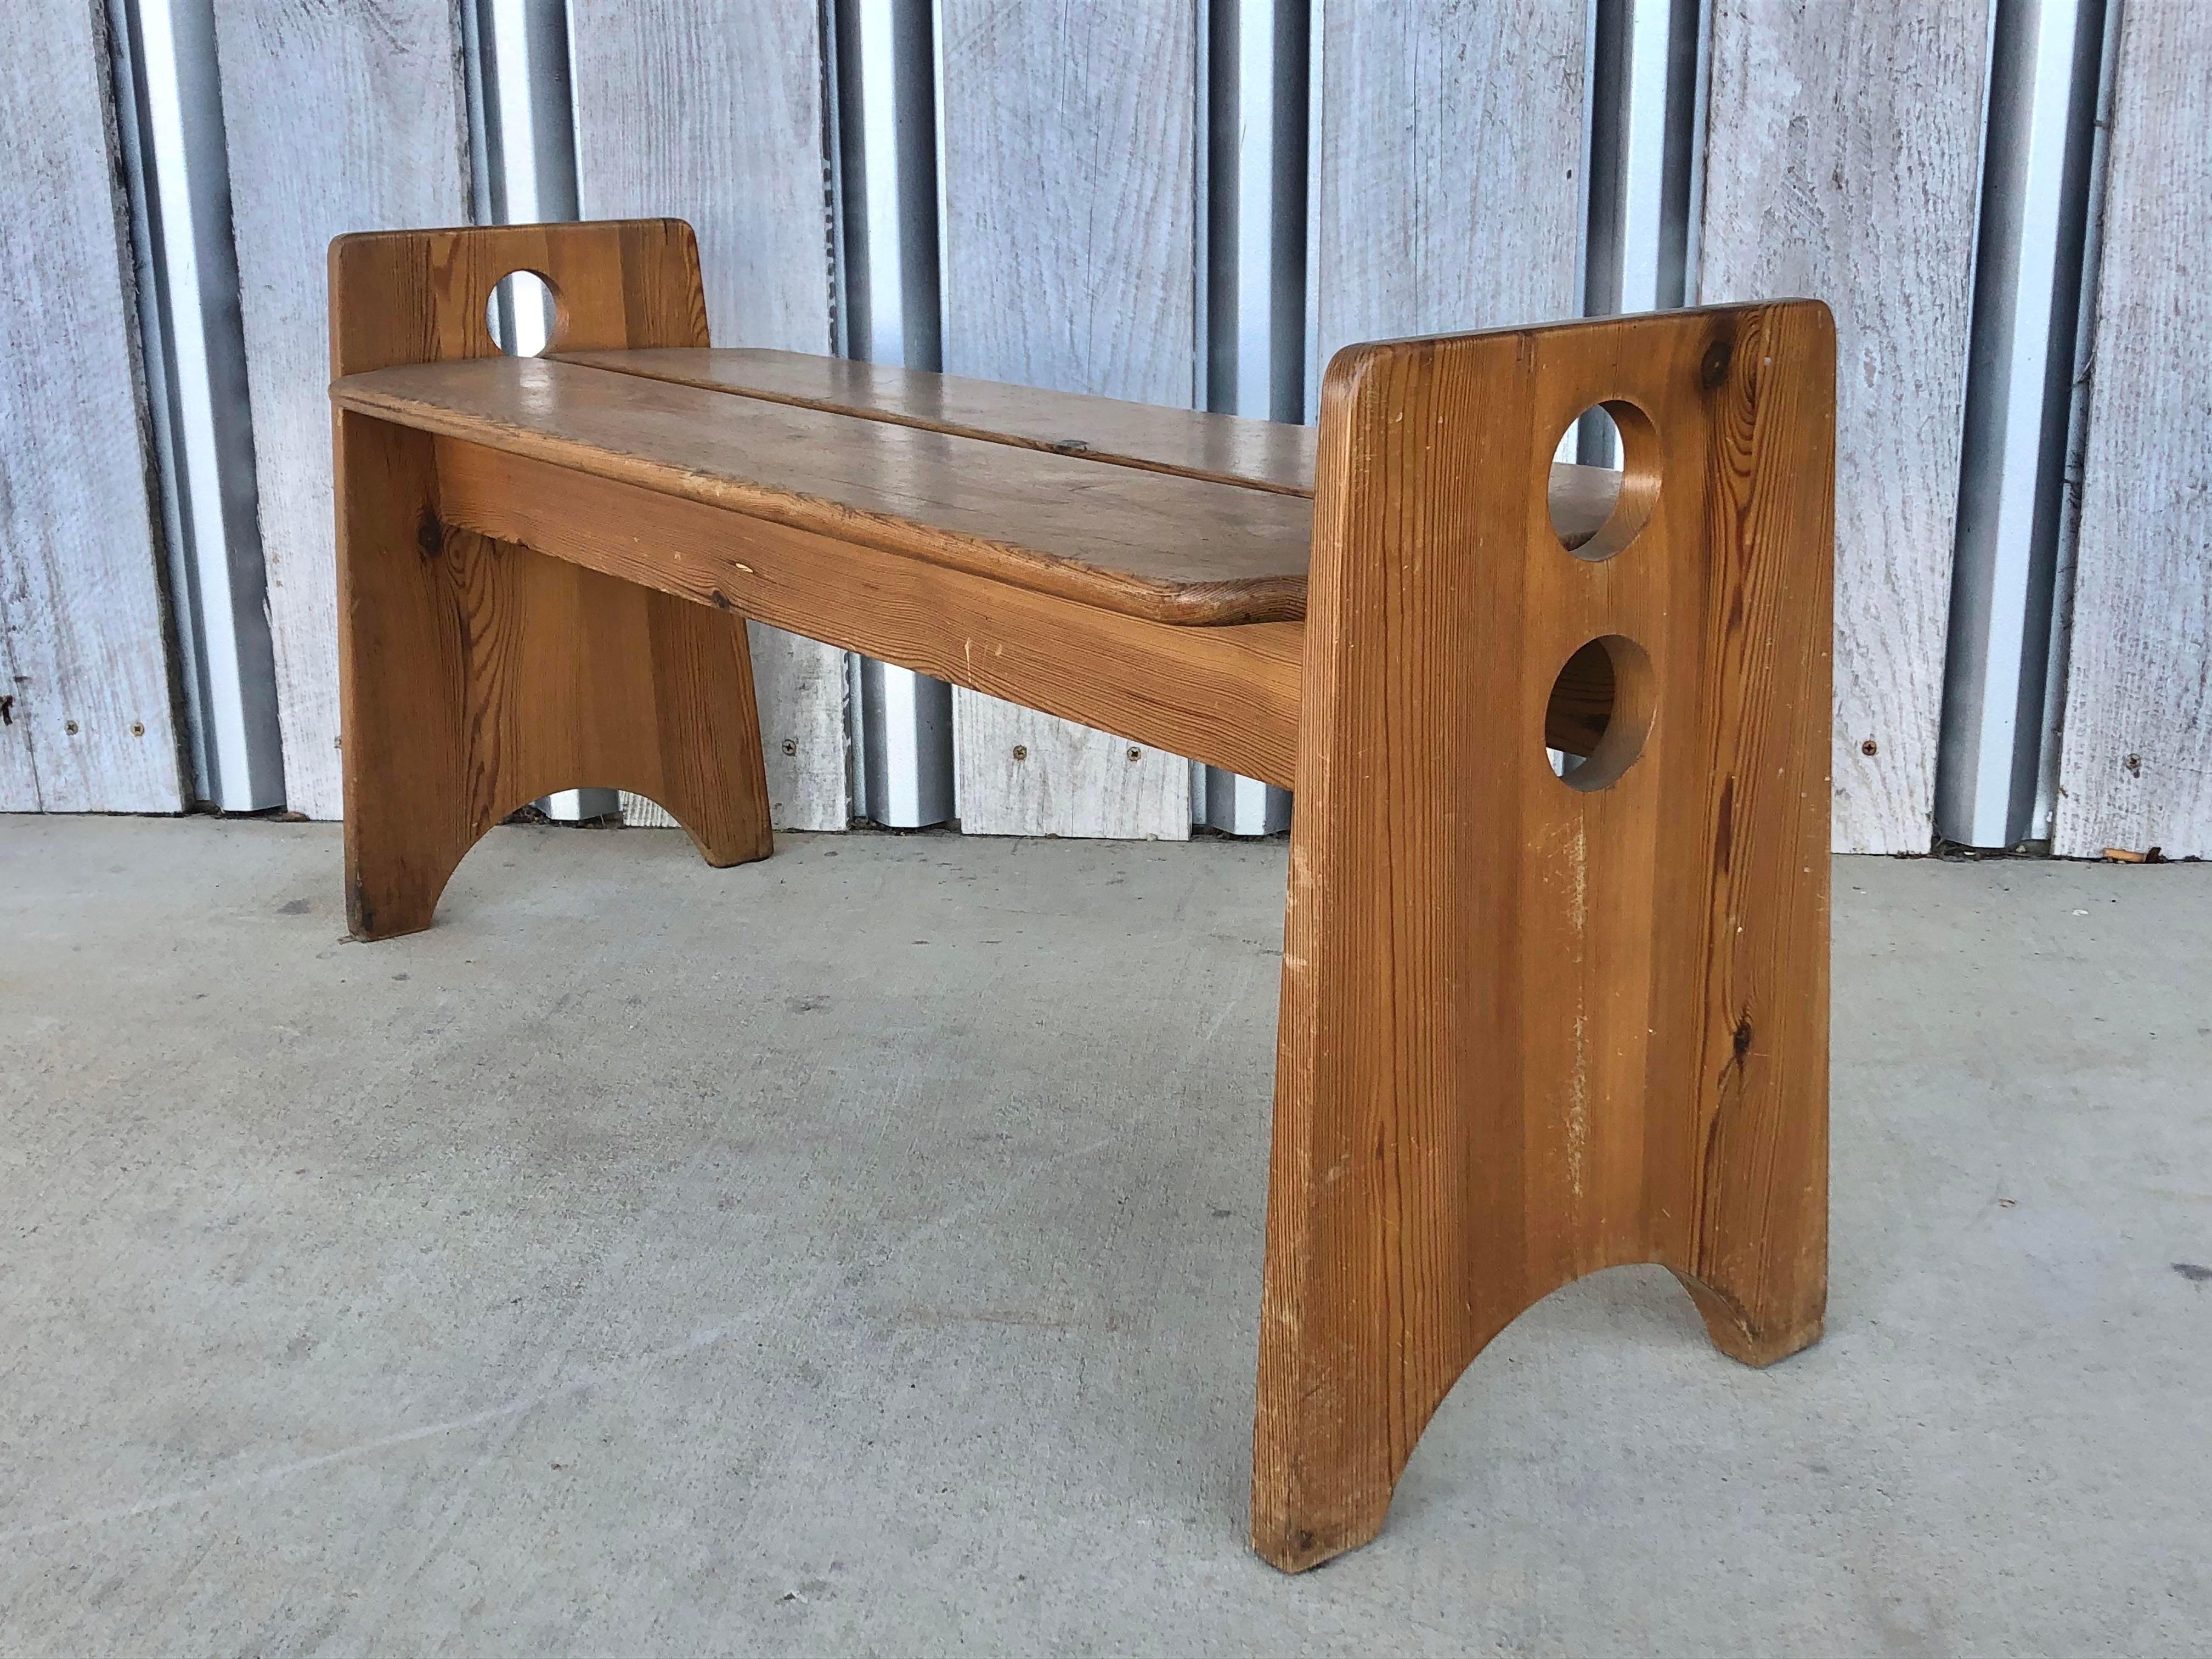 1970’s long pine bench designed by Gilbert Marklund. Two benches and matching table available.